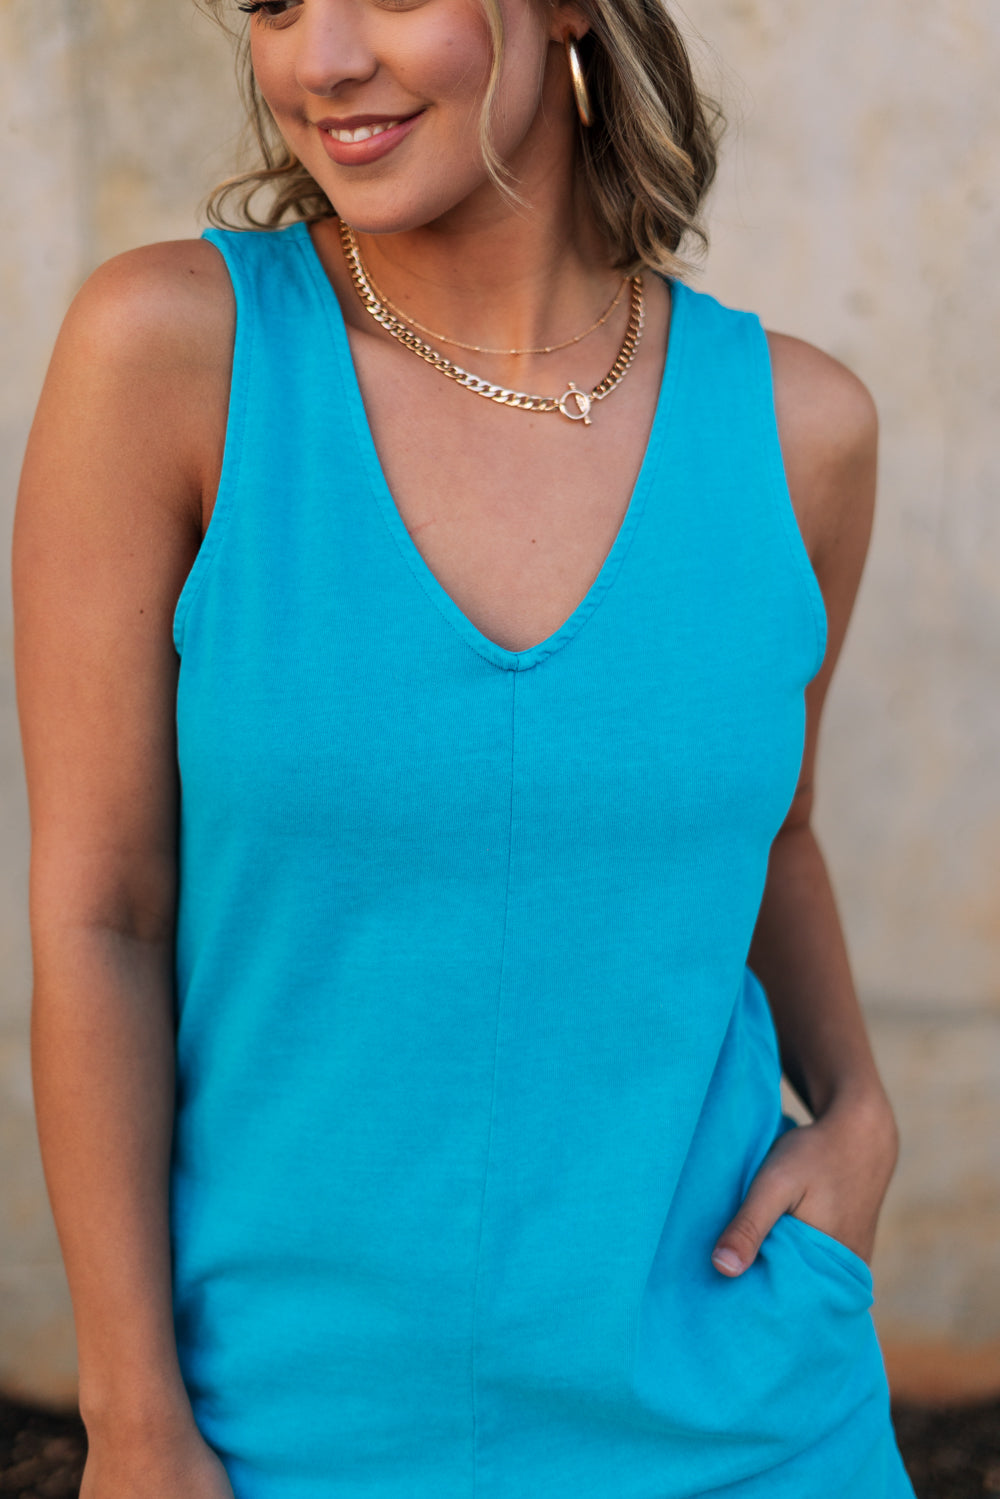 Upper body front view of female model wearing the Chelsea Blue Sleeveless Romper that has bright blue fabric, a v neck, side pockets, and thick straps. Model has hands in pockets.